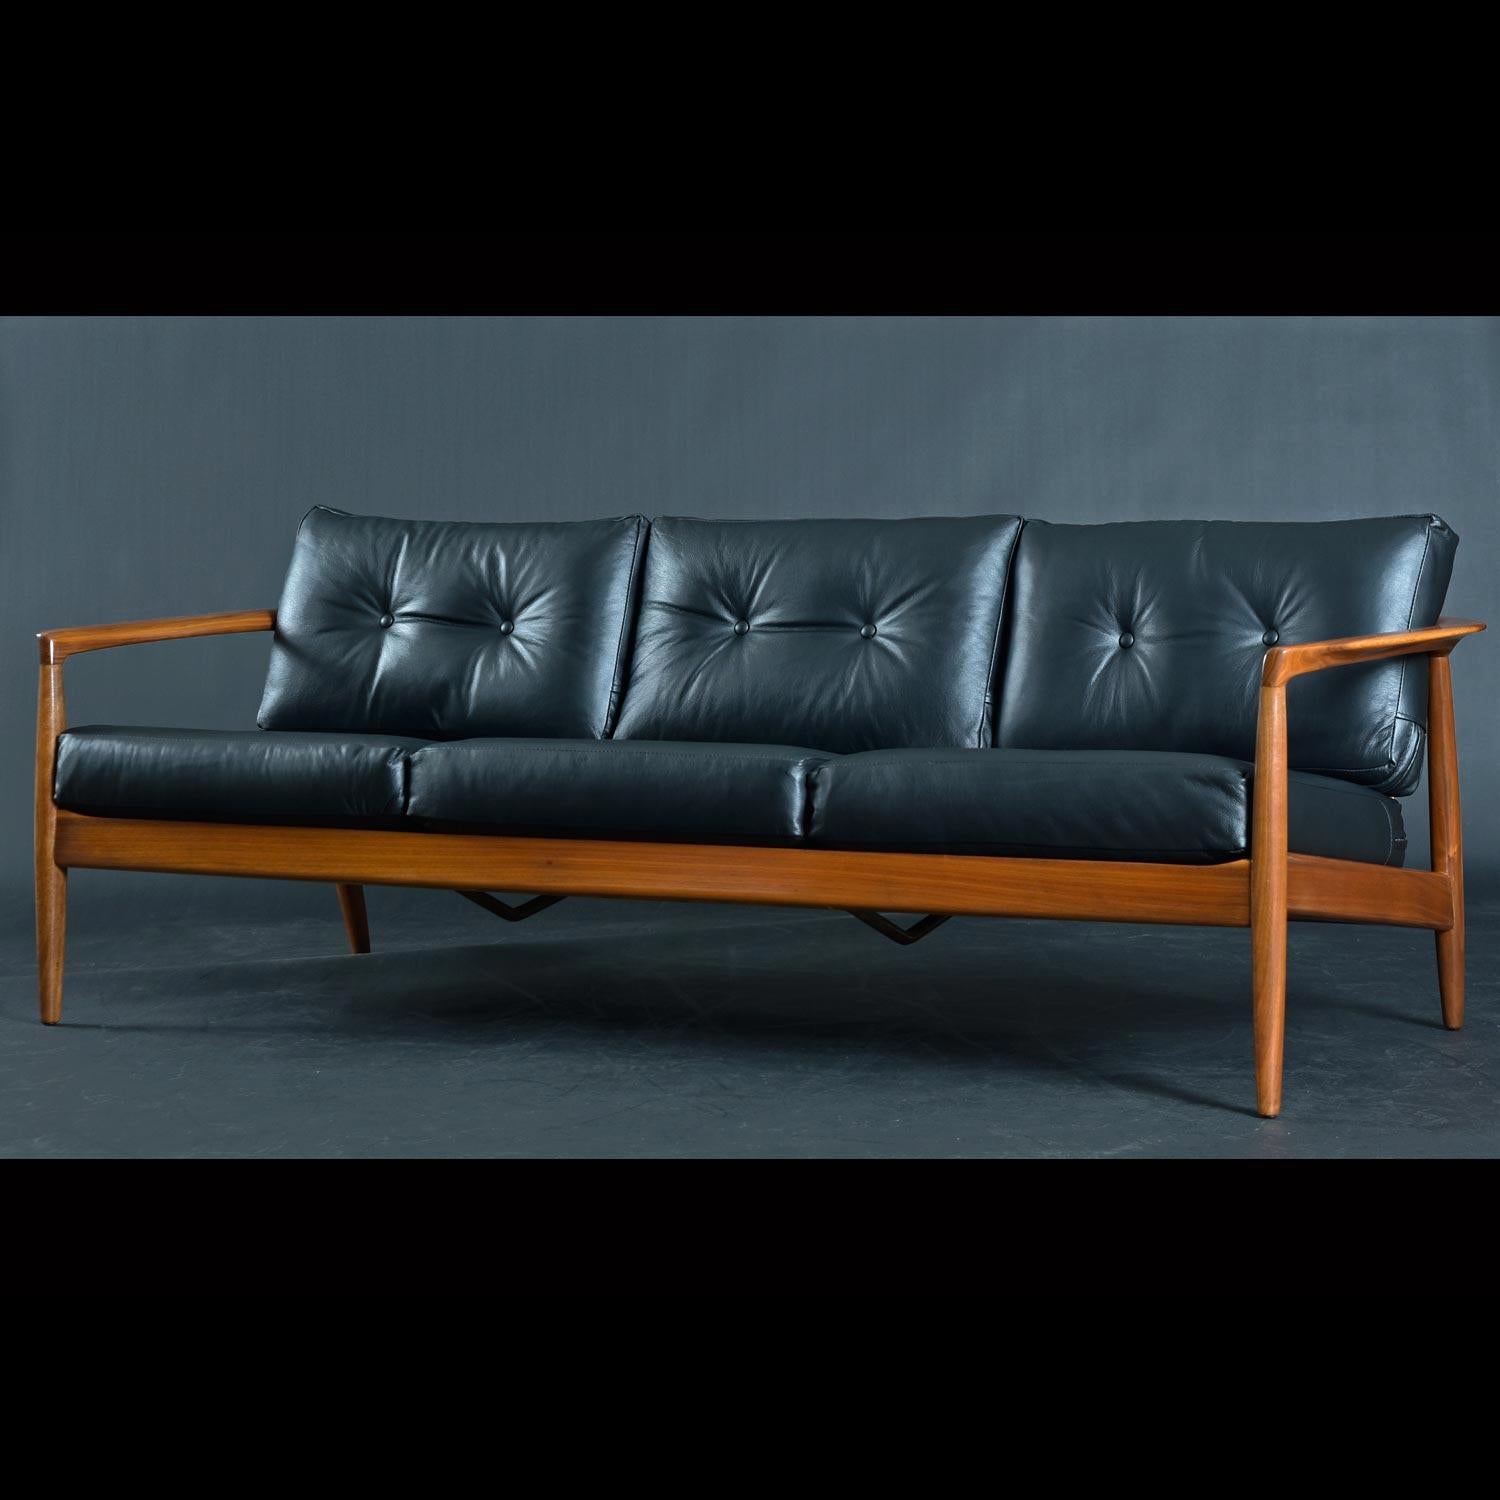 This stunning Swedish made sofa by Dux is one of the finest walnut wood frame sofa’s we have seen from the period. Vintage 19560s, the designer, Folke Ohlsson expands on the quintessential wood frame sofa to create something truly special. Also